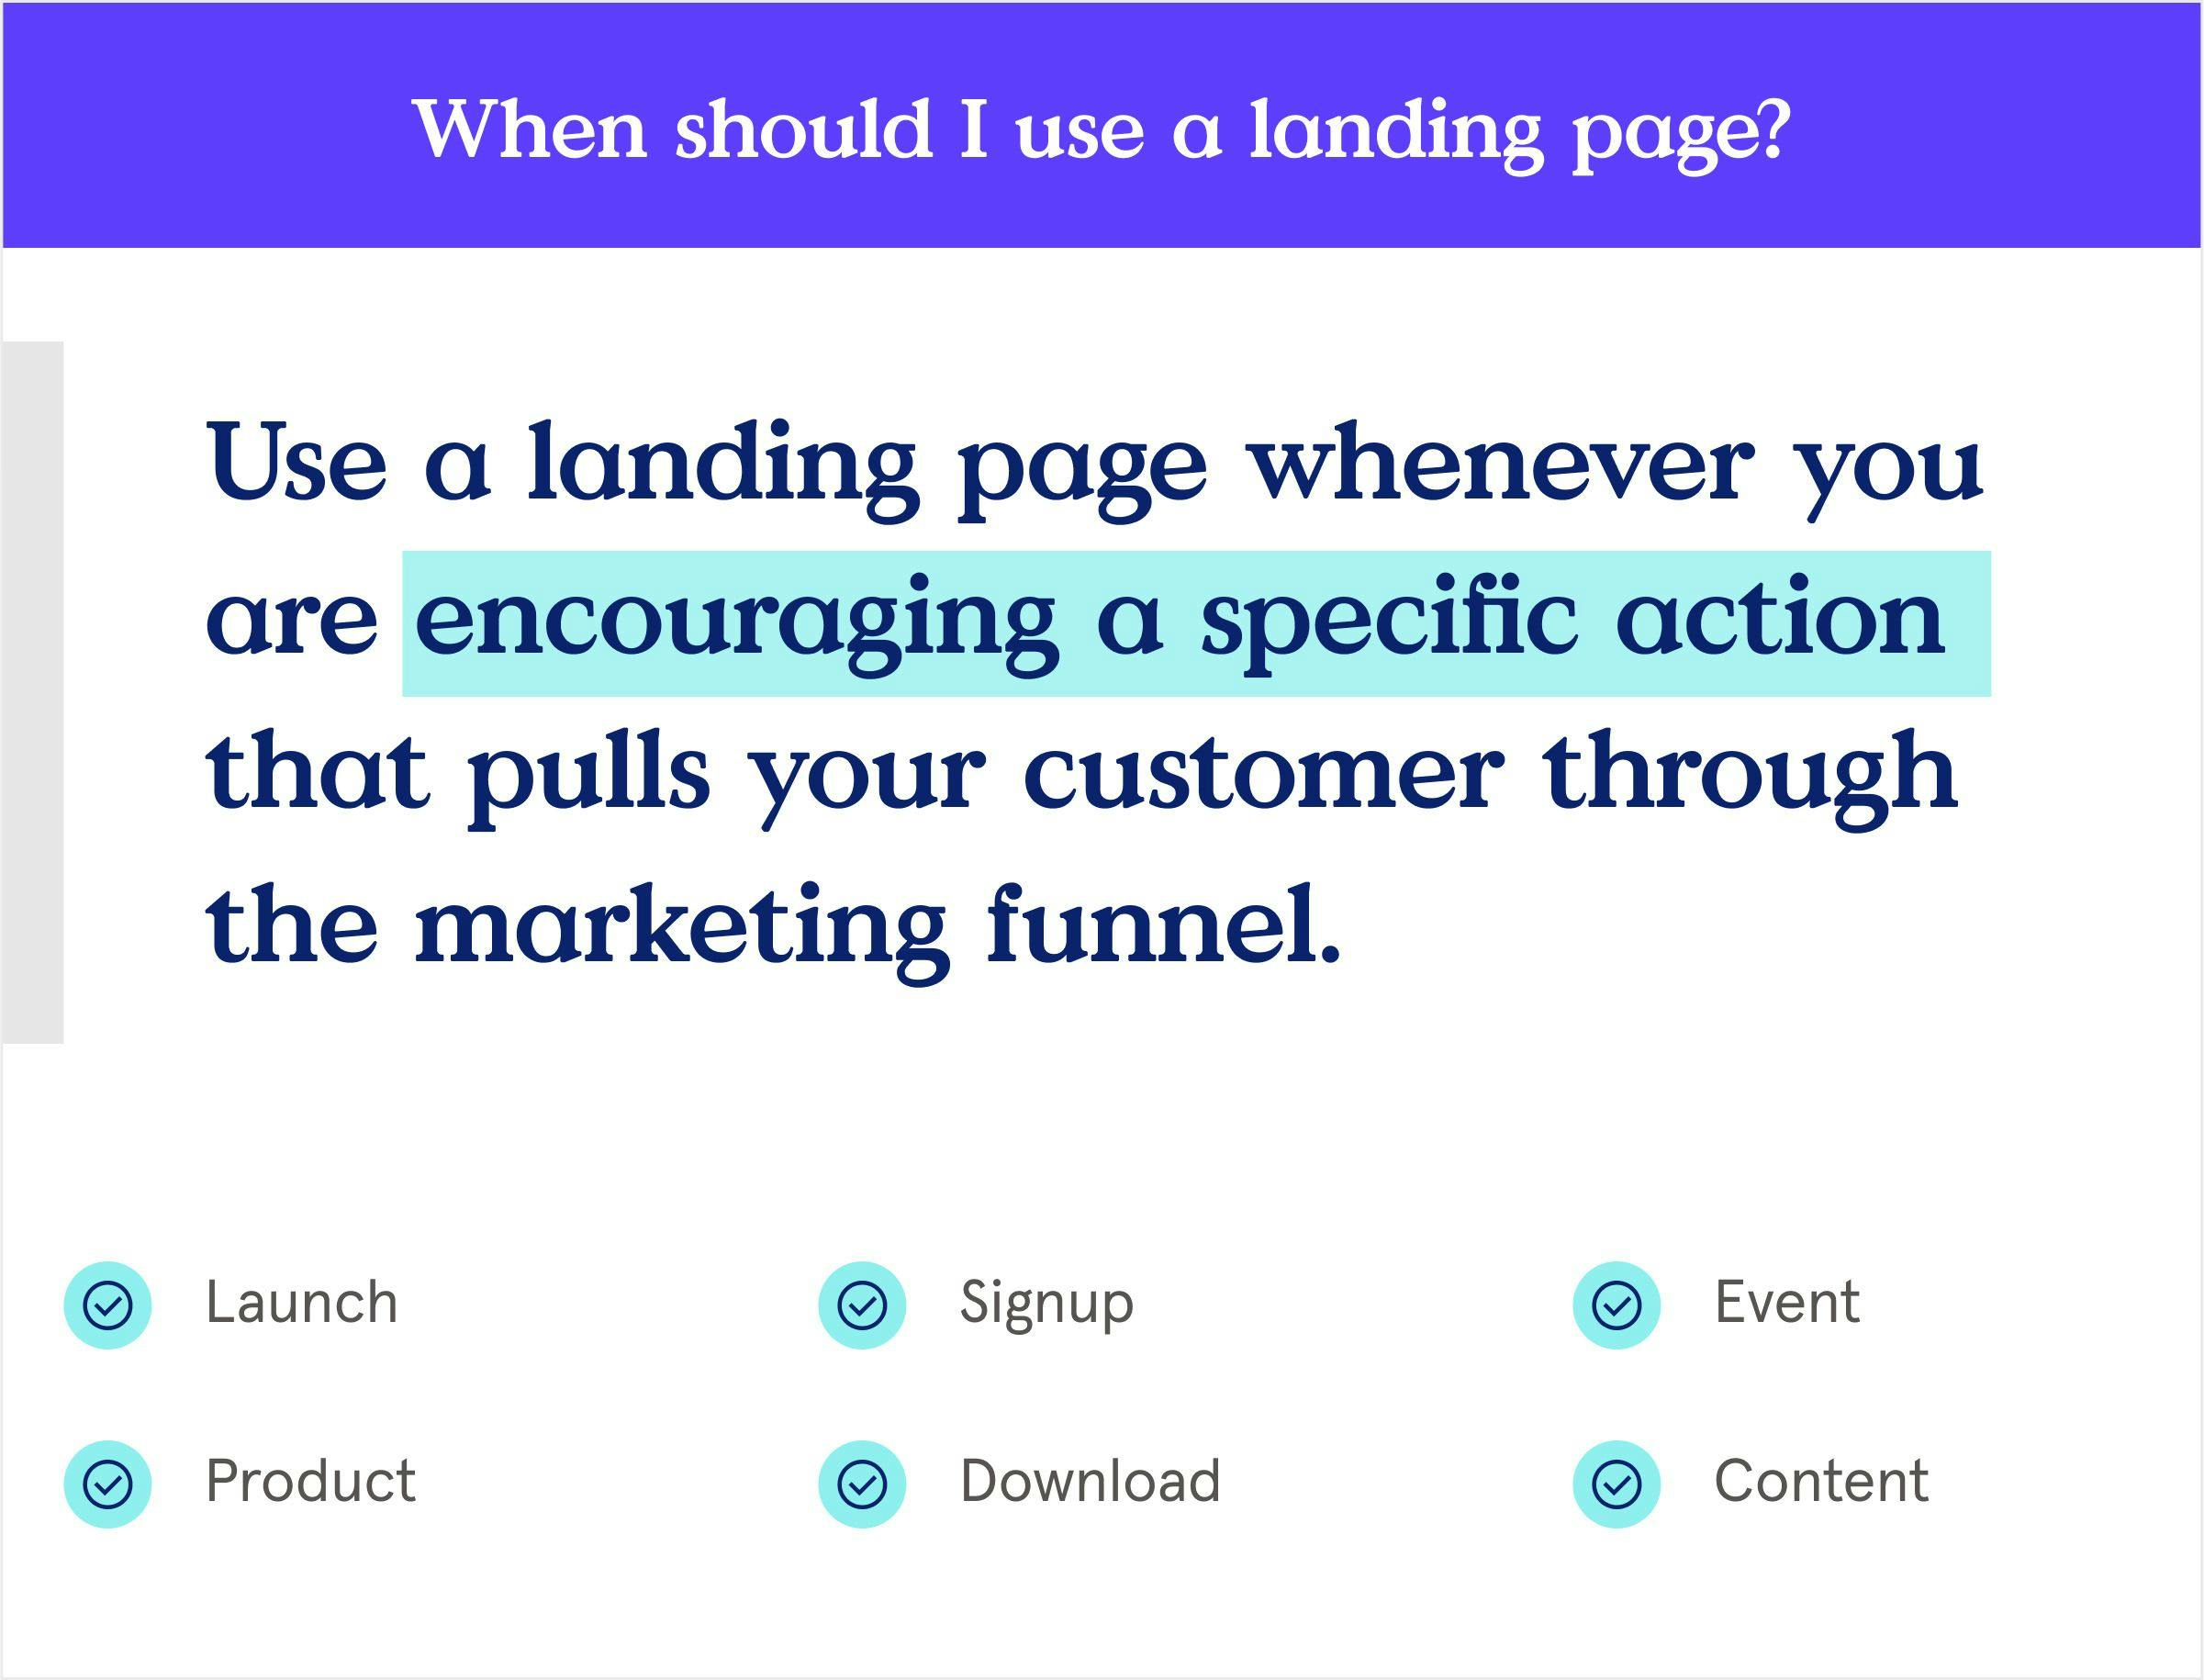 Use a landing page whenever you are encouraging a specific action